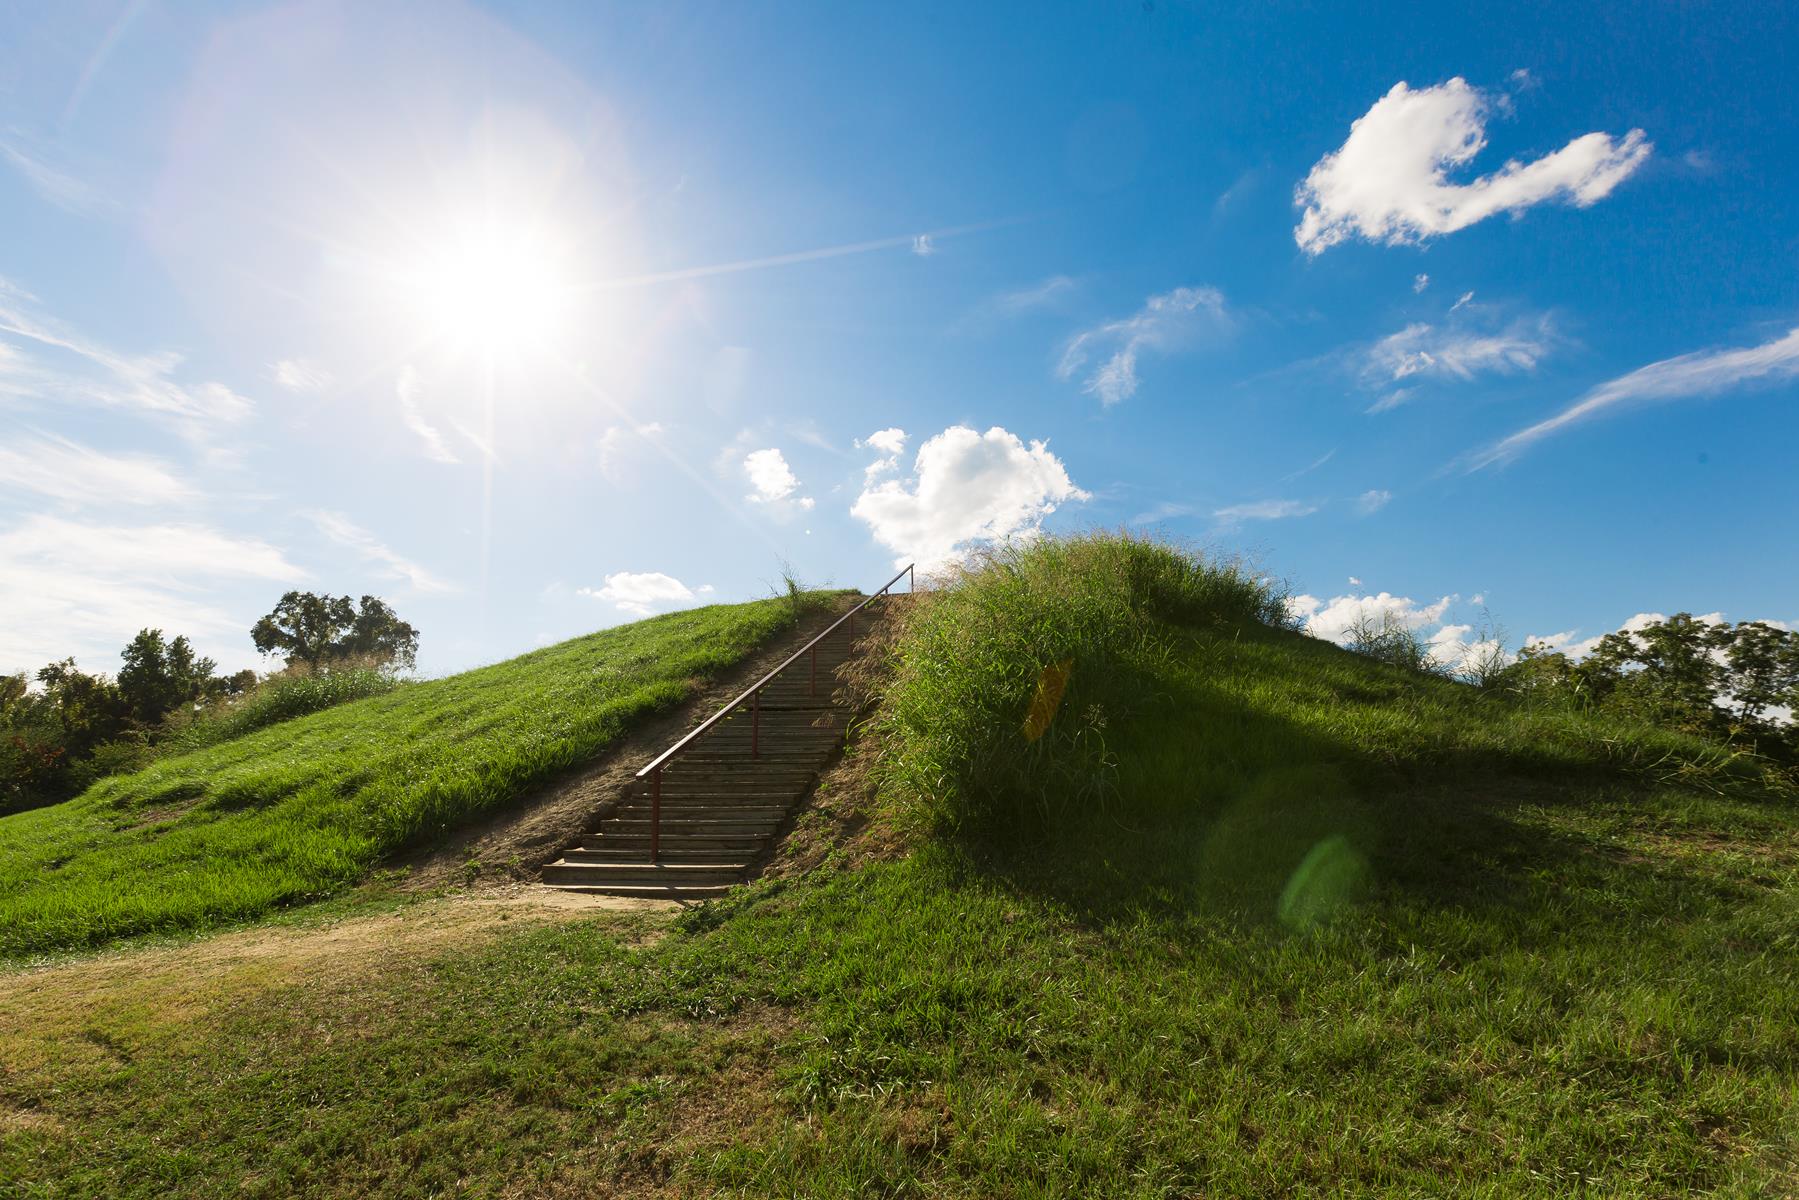 The Emerald Mound Site, also known as the Sellerstown site, is a Plaquemine culture Mississippian period archaeological site located on the Natchez Trace Parkway near Stanton, Mississippi, United States